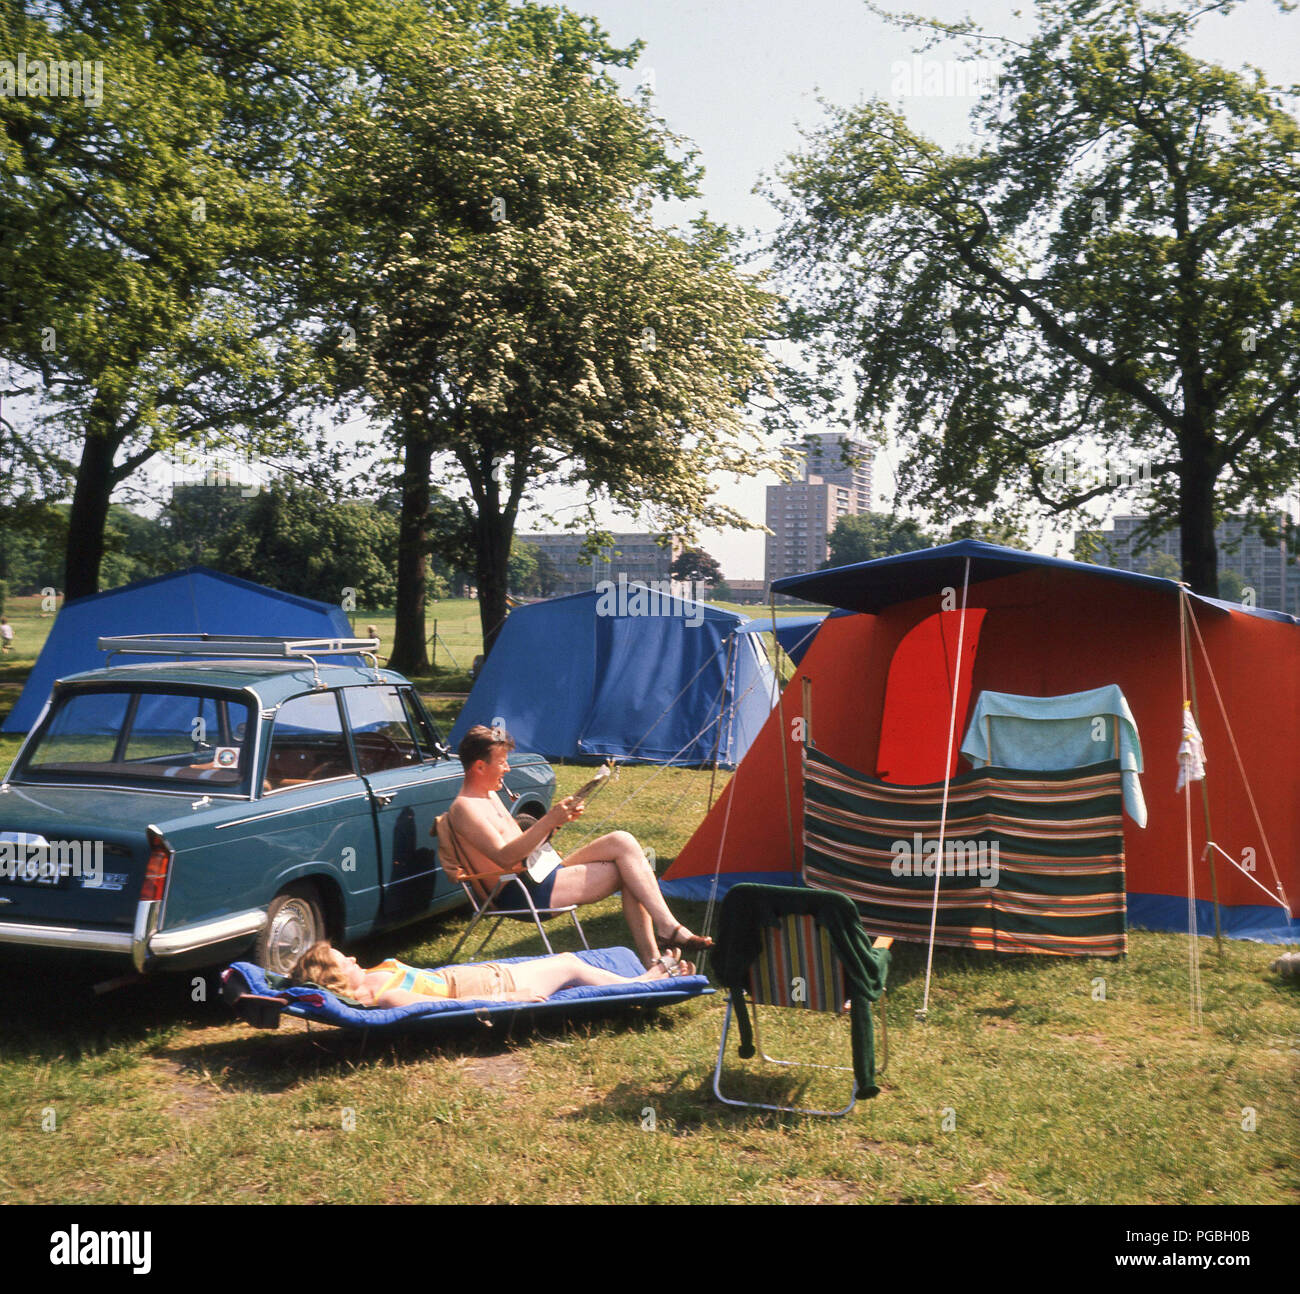 1970s, A couple sitting by their car, a Triumph Herald relaxing in the sunshine by their tent on a simple camping holiday on the outskirts of the city of Edinburgh, Scotland. The man is sitting reading a newspaper, while the woman lies on a sun lounger, a low reclining chair, popular in the era for use when at the beach, in the garden or camping. Stock Photo